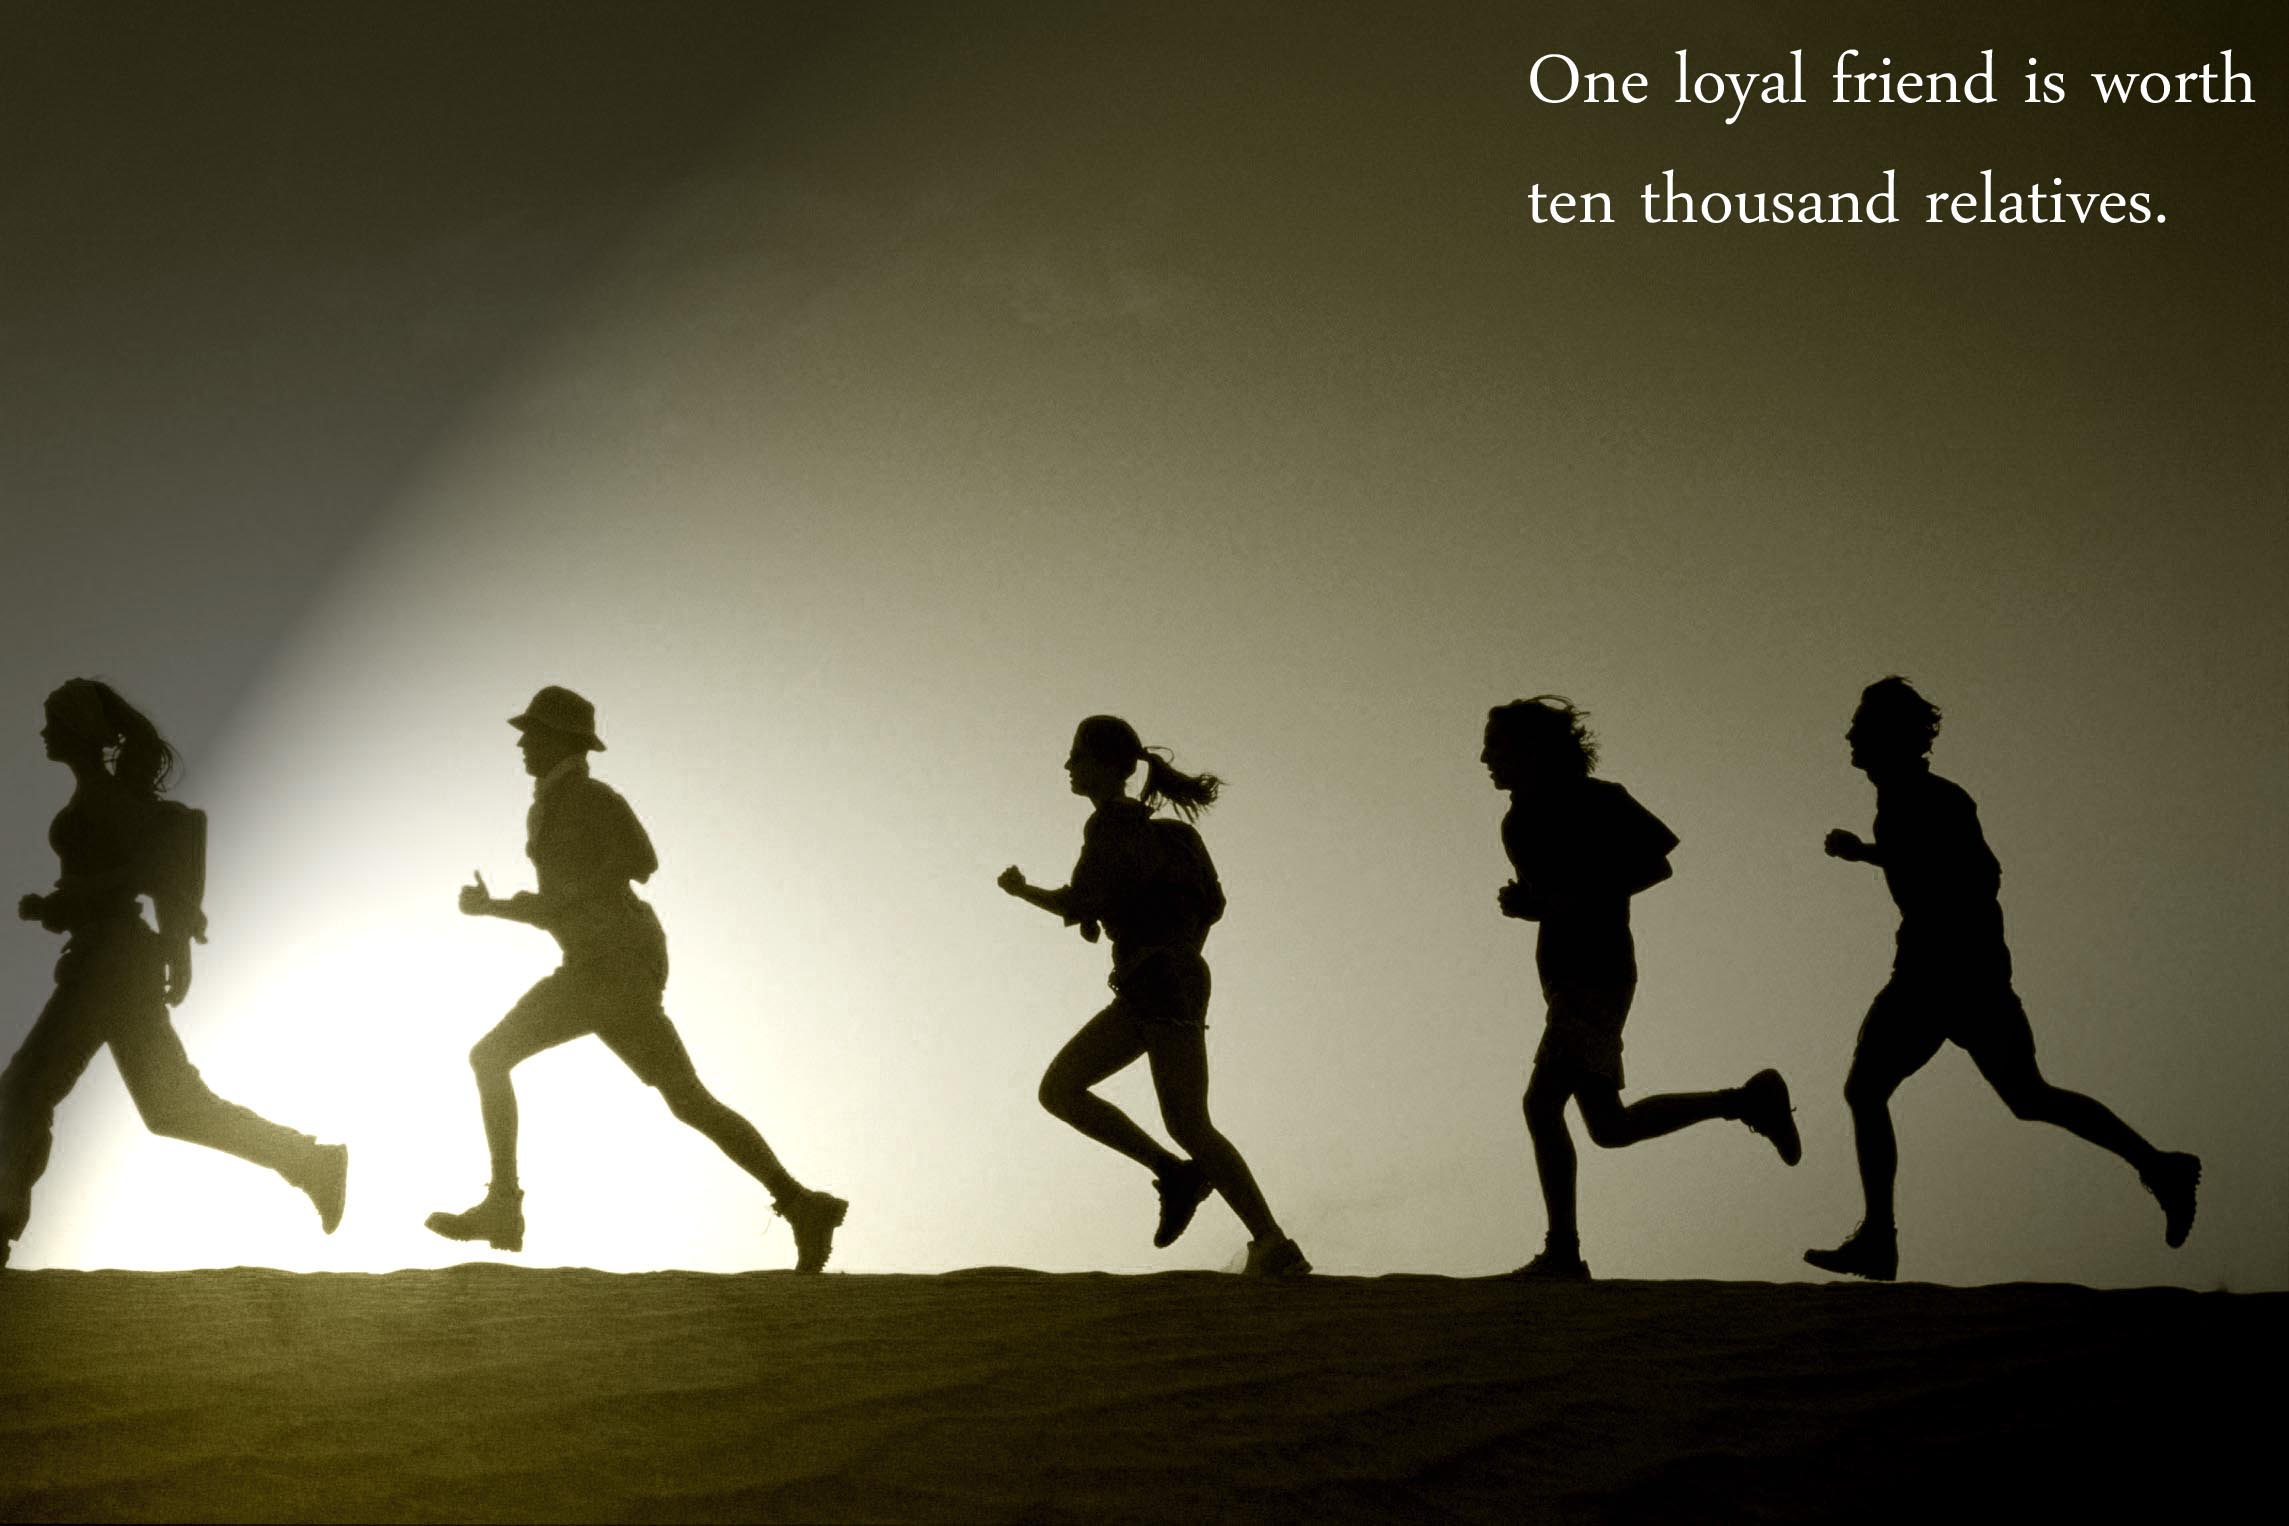 Friendship Quotes - People Running In A Race , HD Wallpaper & Backgrounds